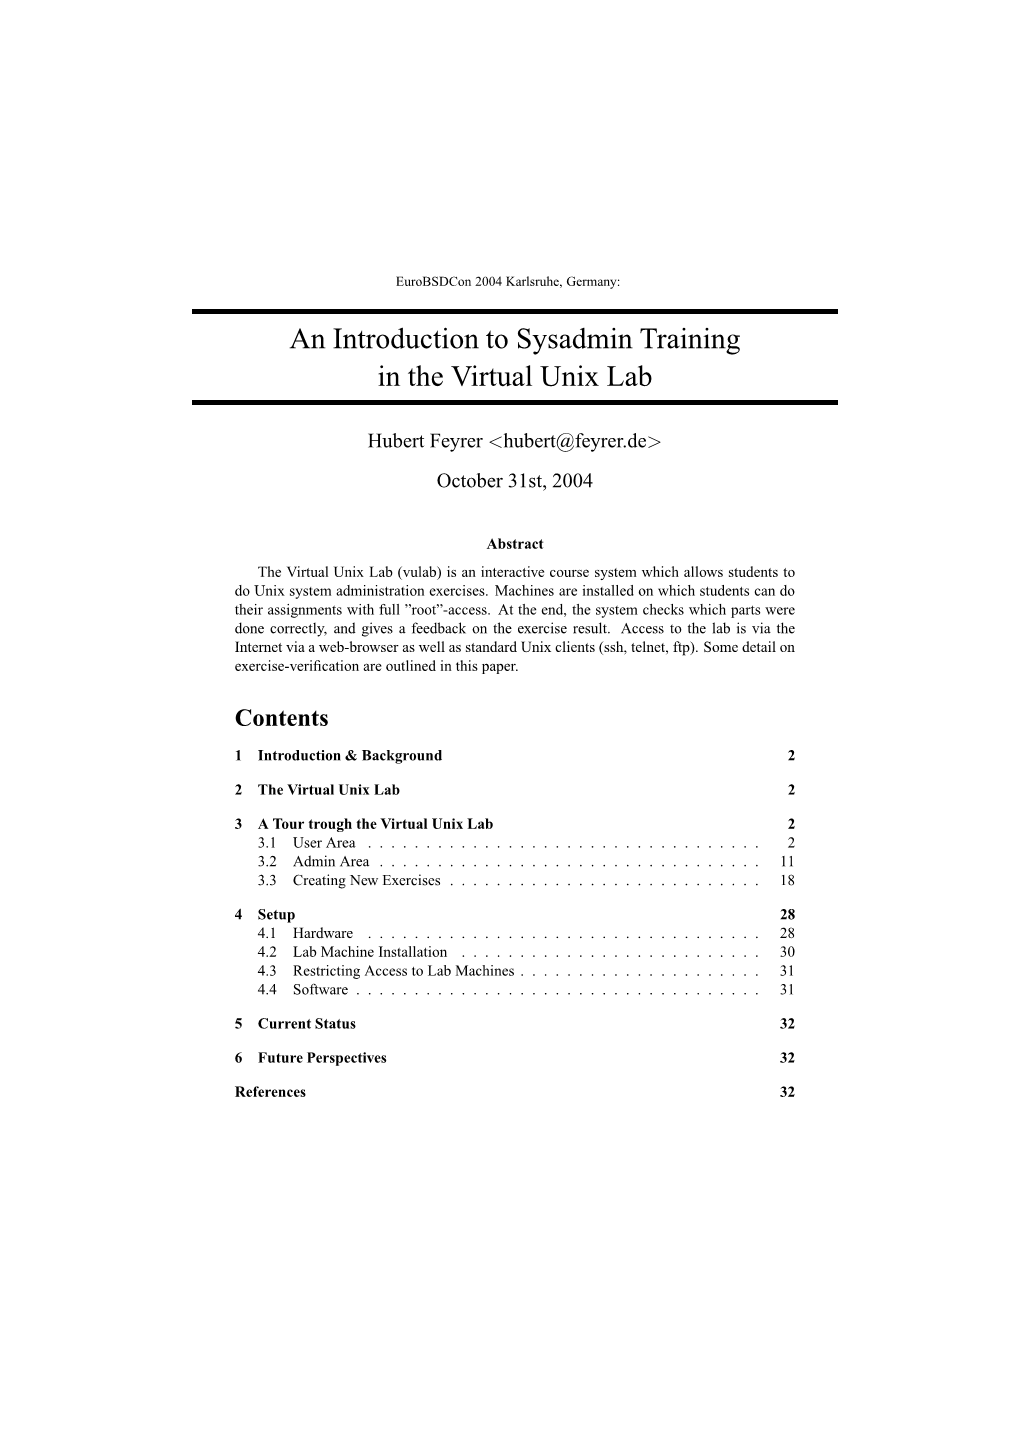 An Introduction to Sysadmin Training in the Virtual Unix Lab